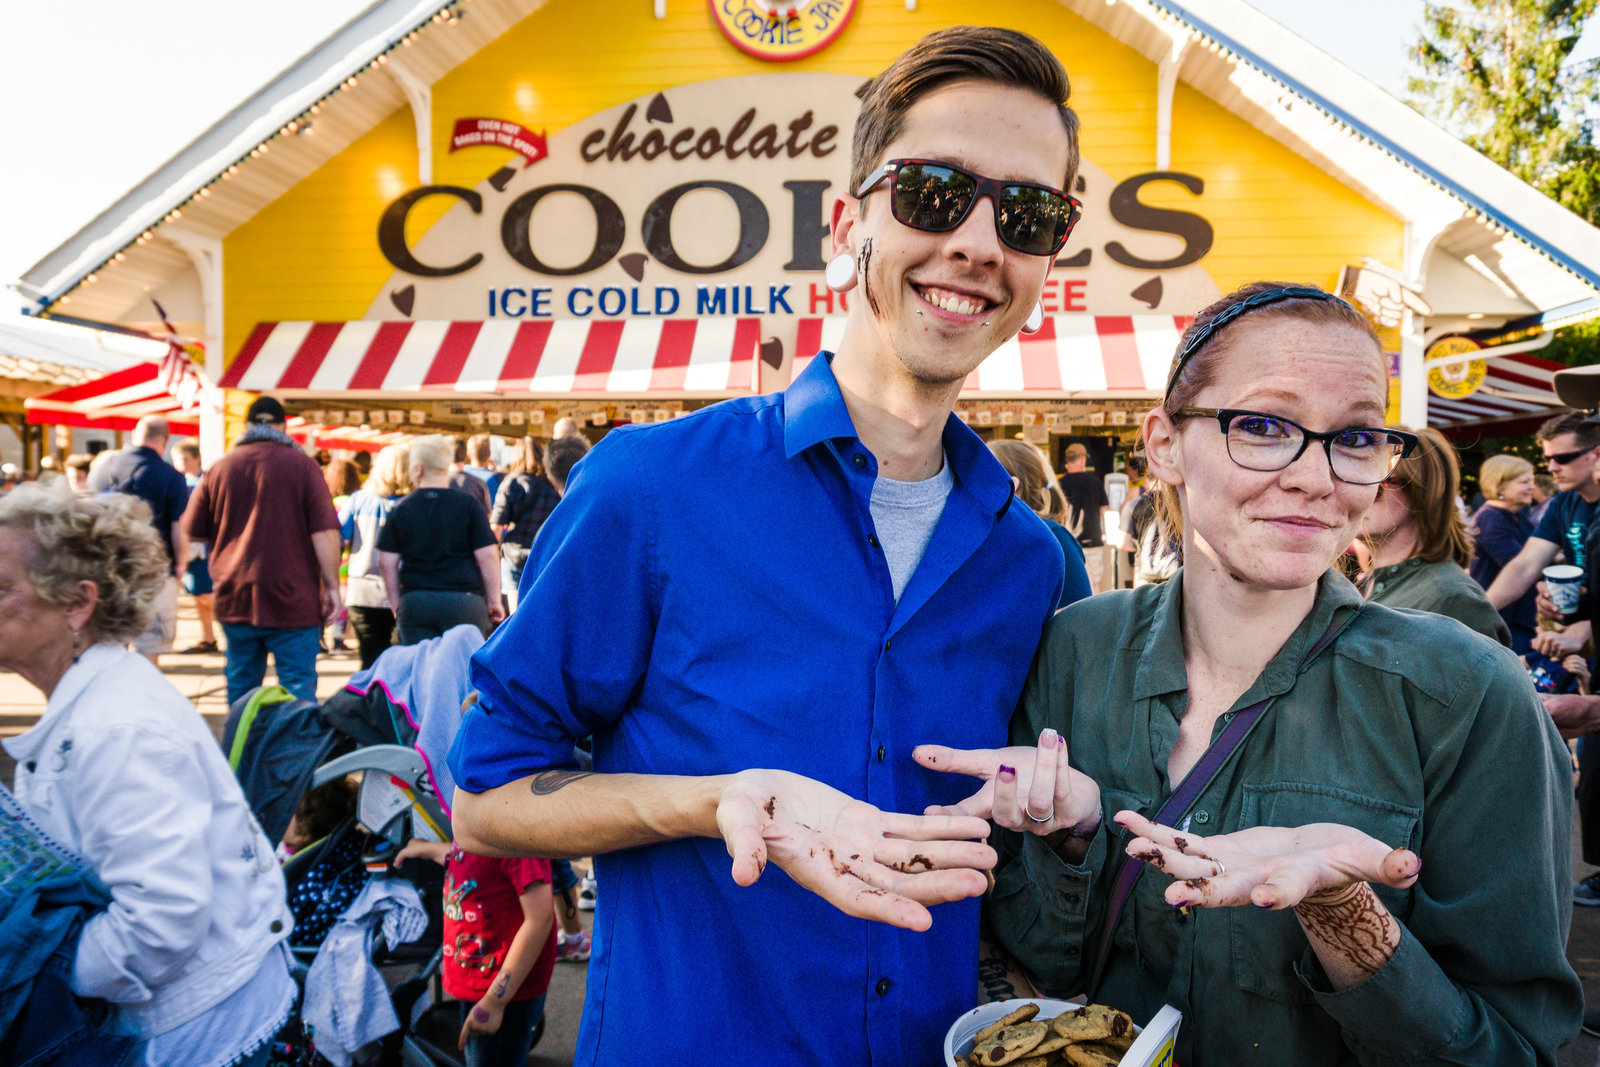 Man and woman with tattoos and piercings eating cookies at Minnesota State Fair